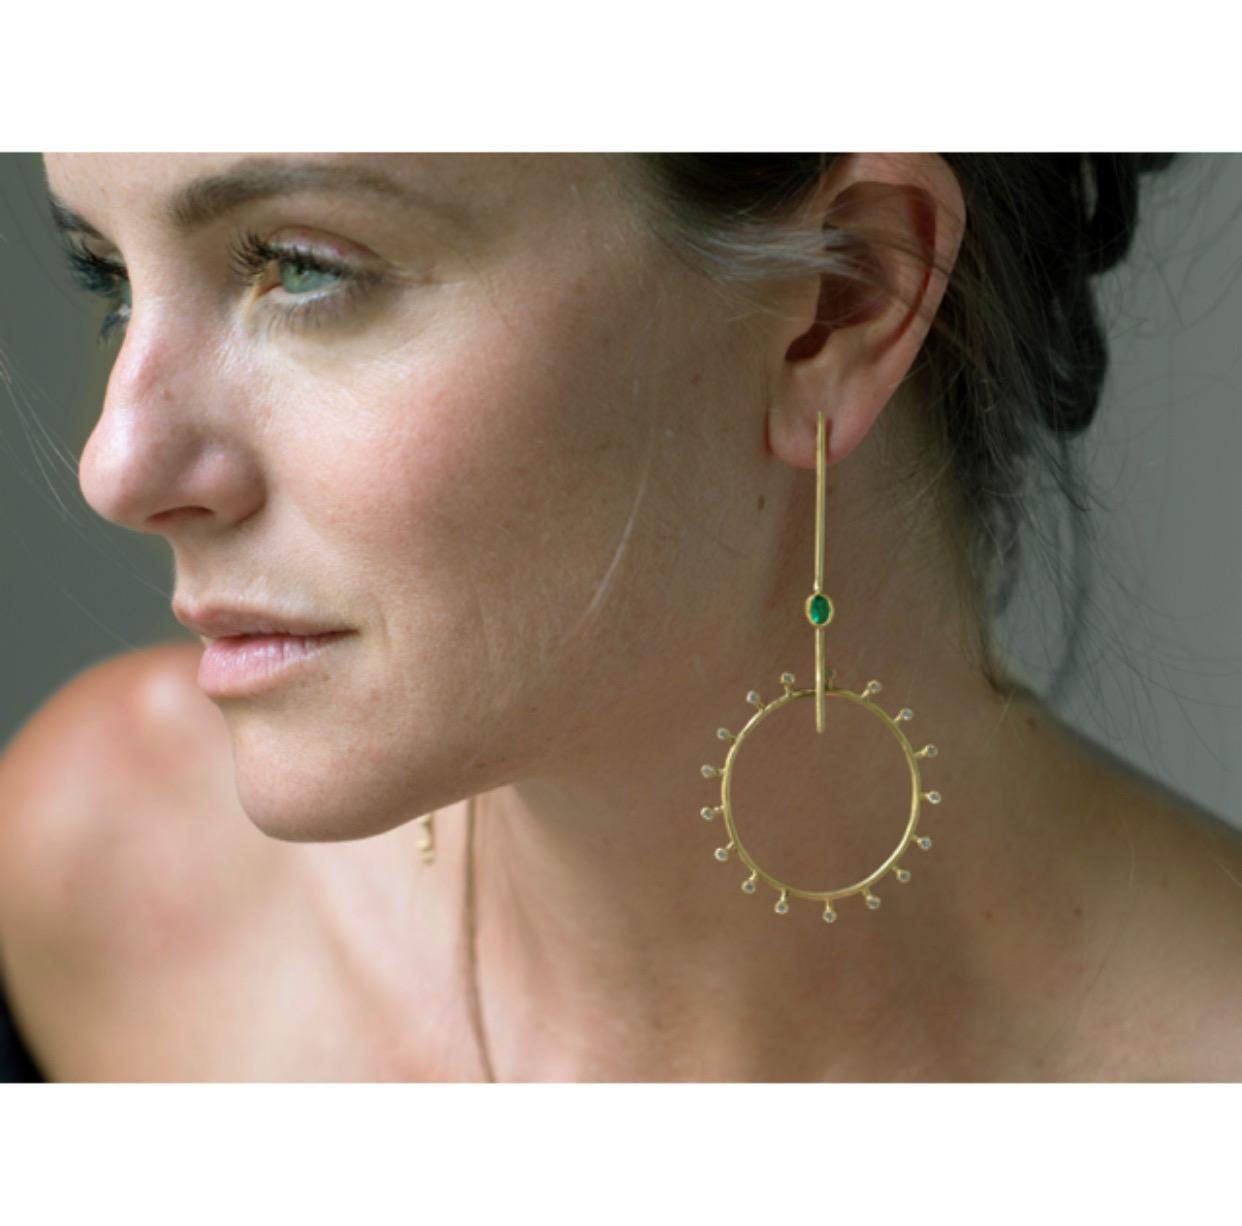 This one of a kind, playful pair of earrings feature Gemfields ethically sourced Zambian emeralds and over a carat total weight of brilliant white diamonds. A hidden hinge allows the hoop section to swing freely, allowing the diamonds to catch the